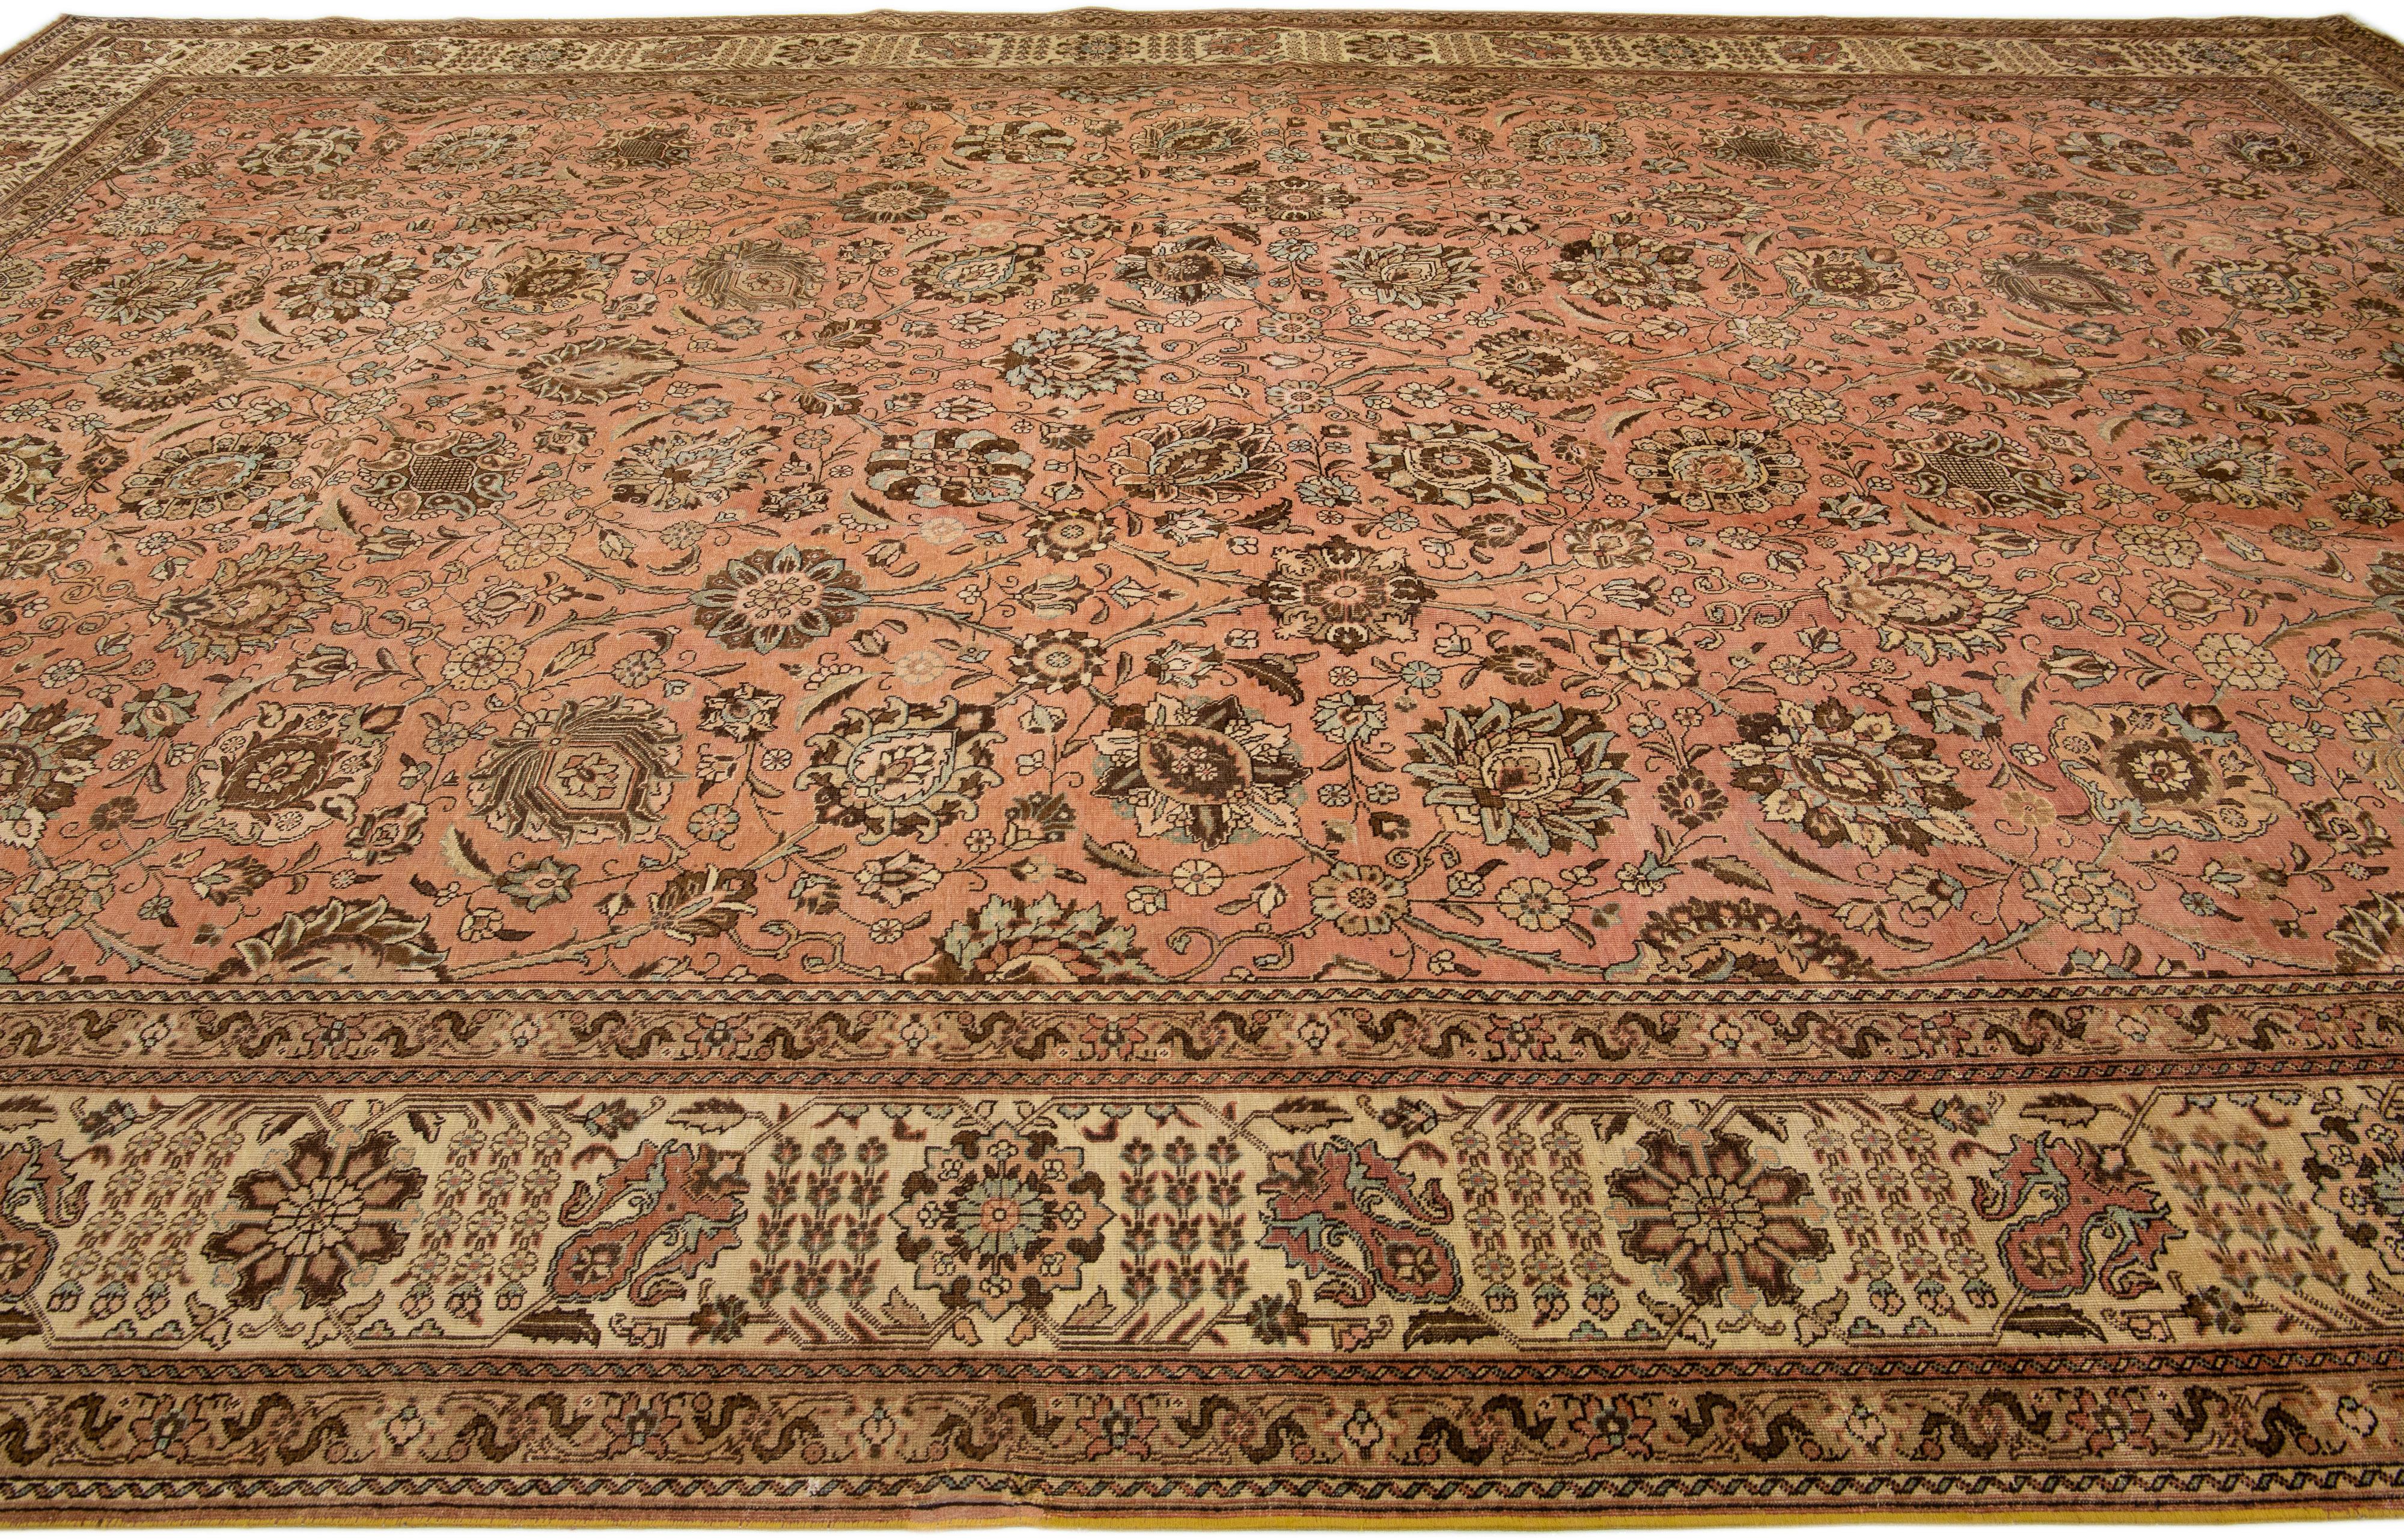 Peach Handmade Antique Persian Tabriz Wool Rug with Floral Motif In Excellent Condition For Sale In Norwalk, CT